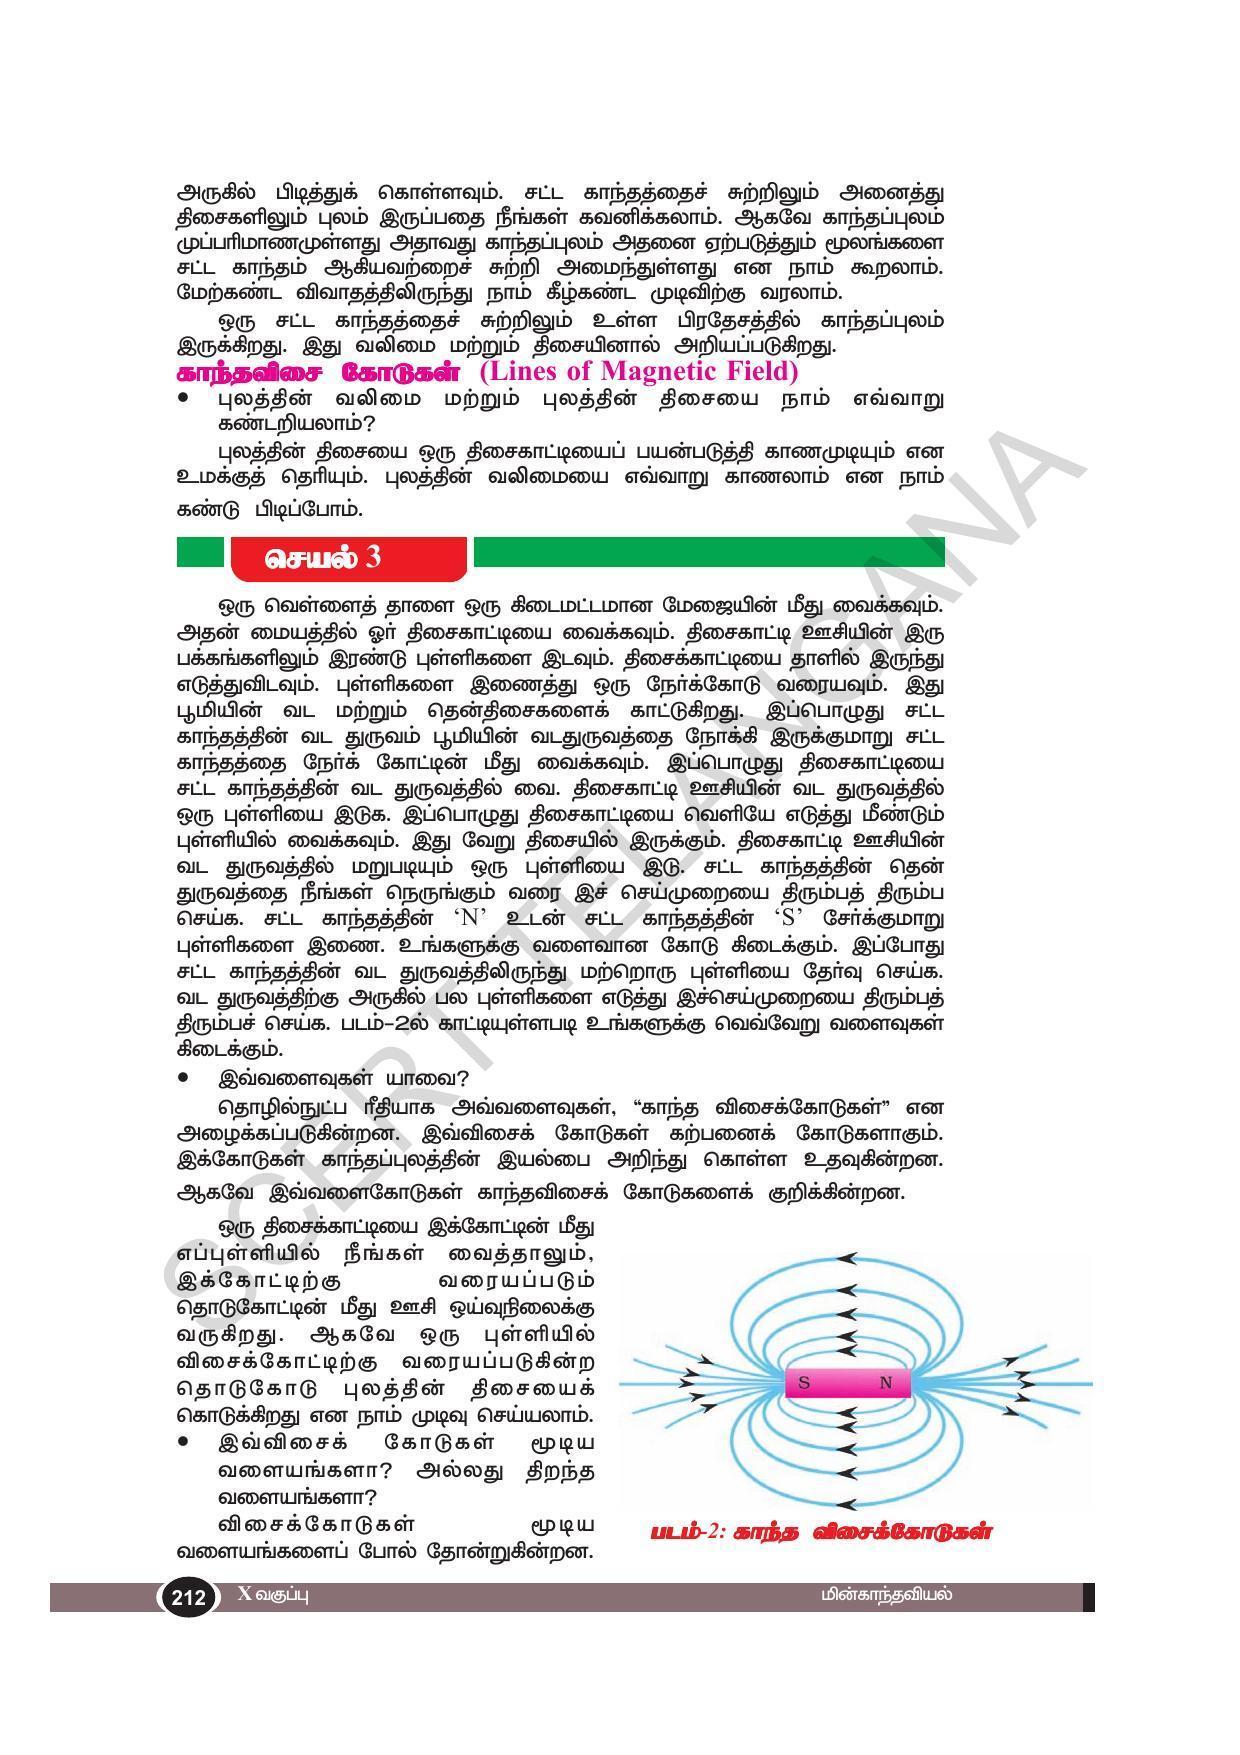 TS SCERT Class 10 Physical Science(Tamil Medium) Text Book - Page 224